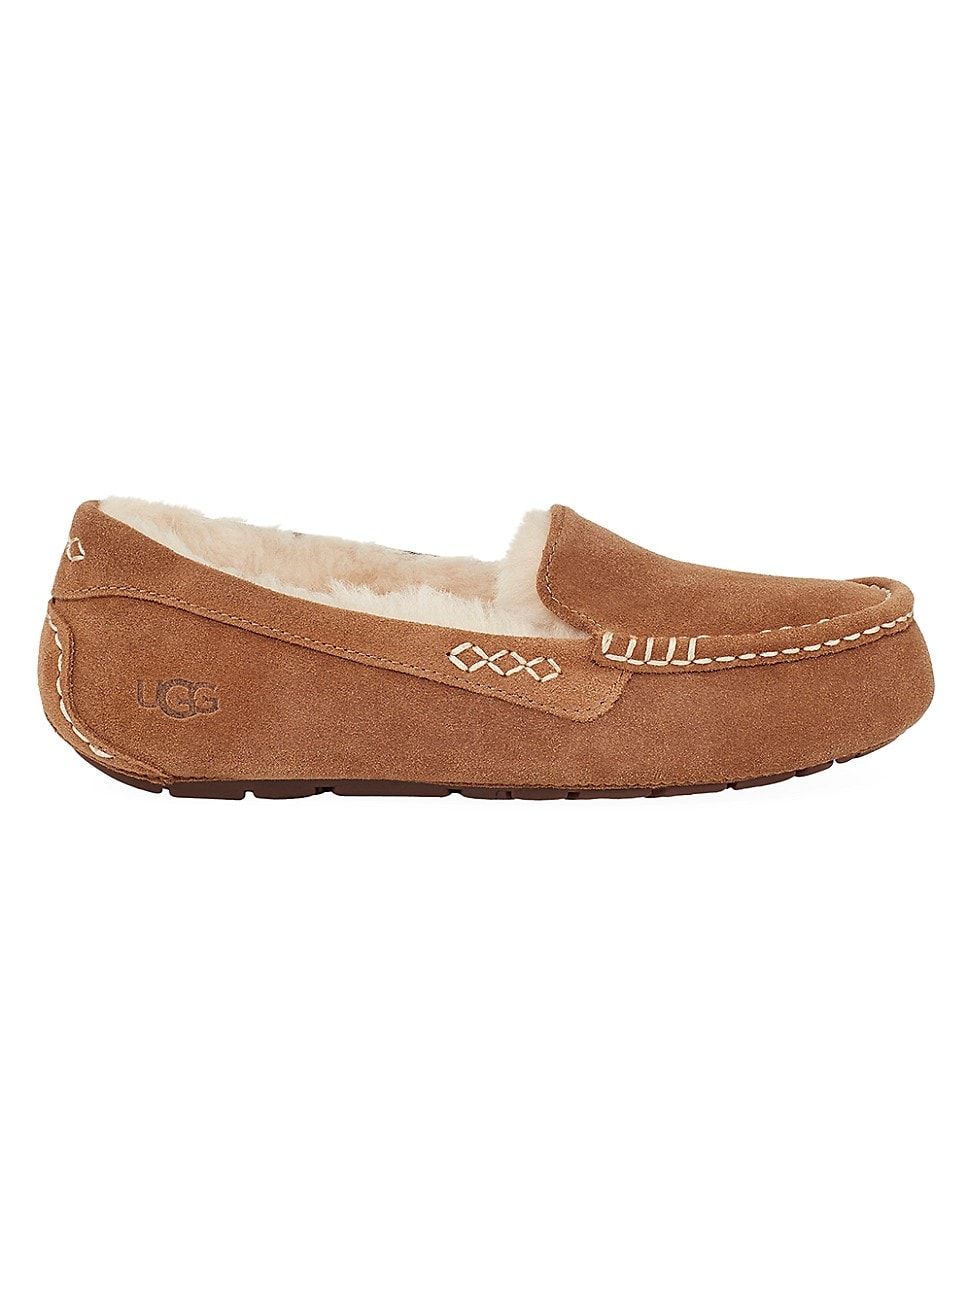 UGG Ansley UGGPure-Lined Suede Slippers | Saks Fifth Avenue